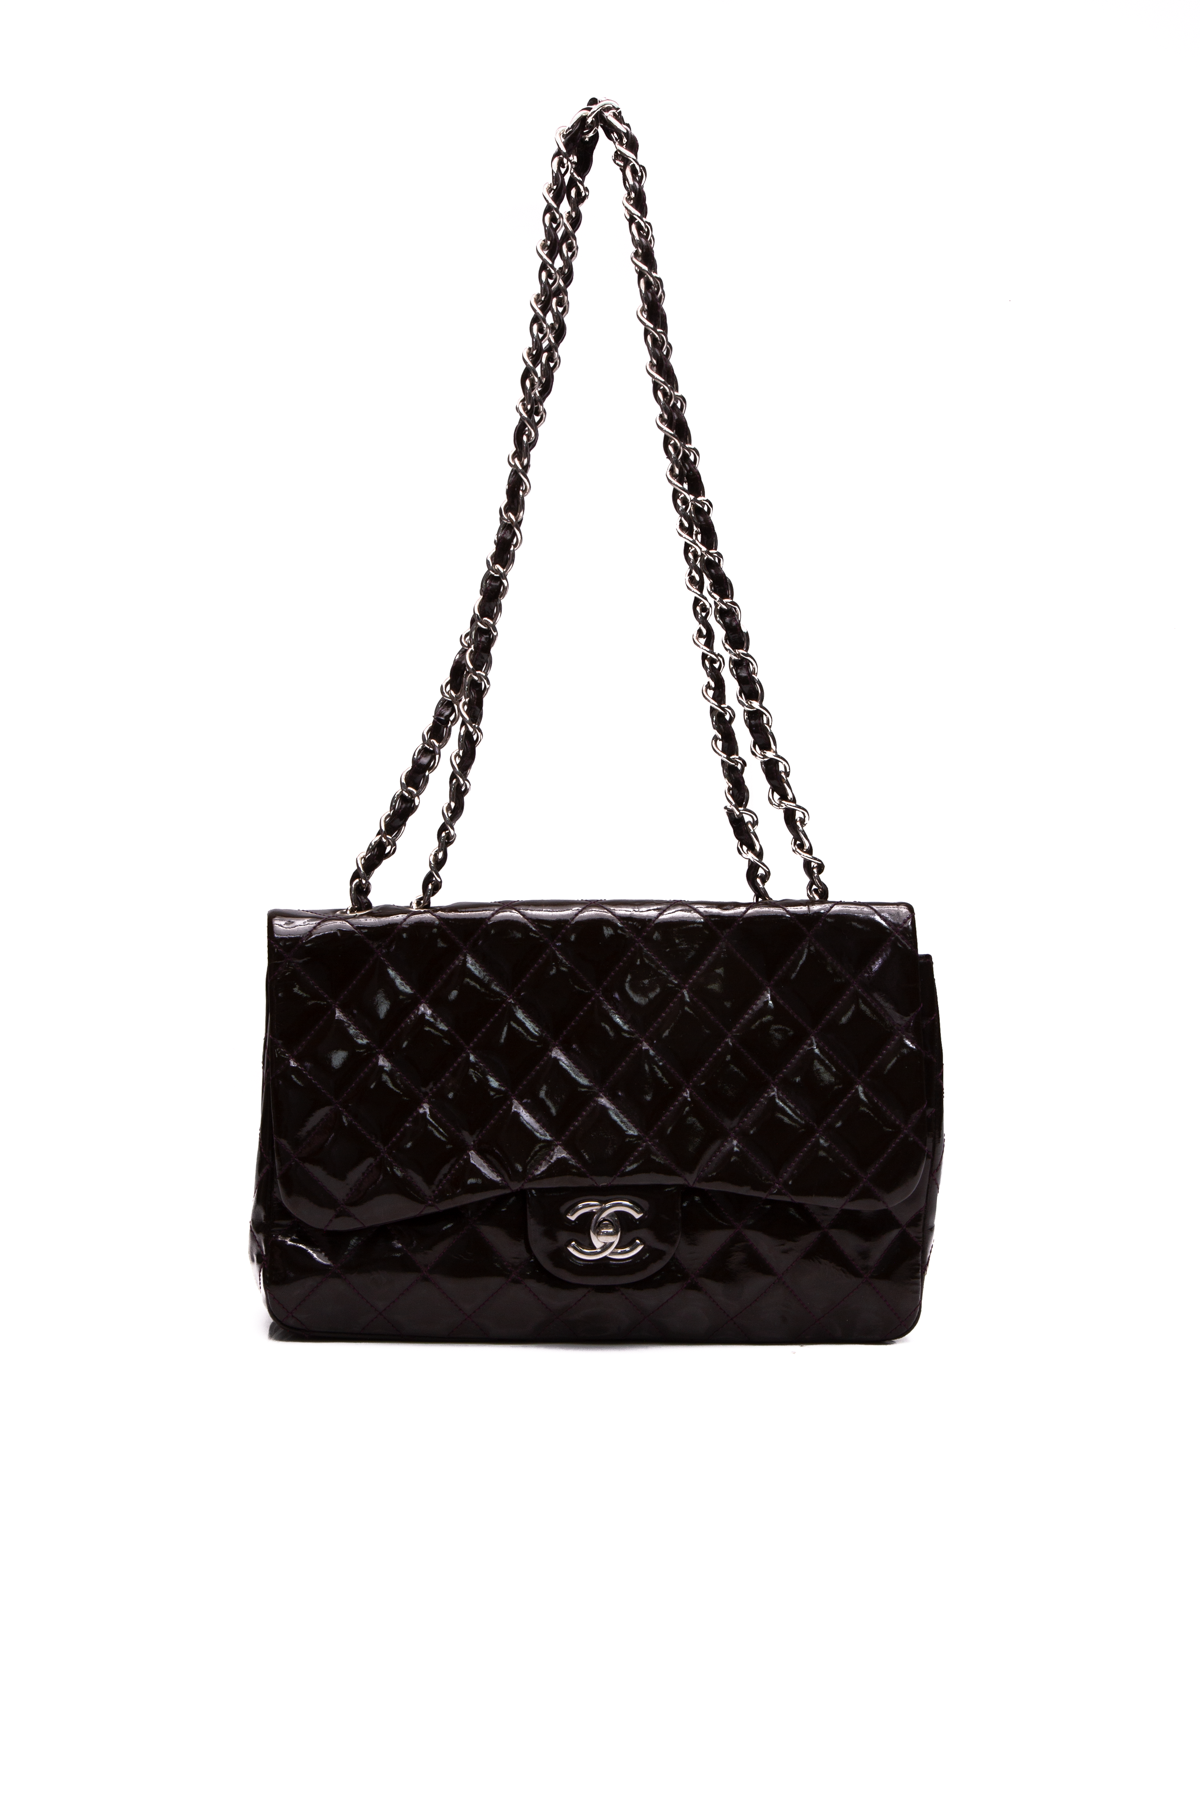 Chanel Black Quilted Patent Leather Classic Jumbo Double Flap Bag